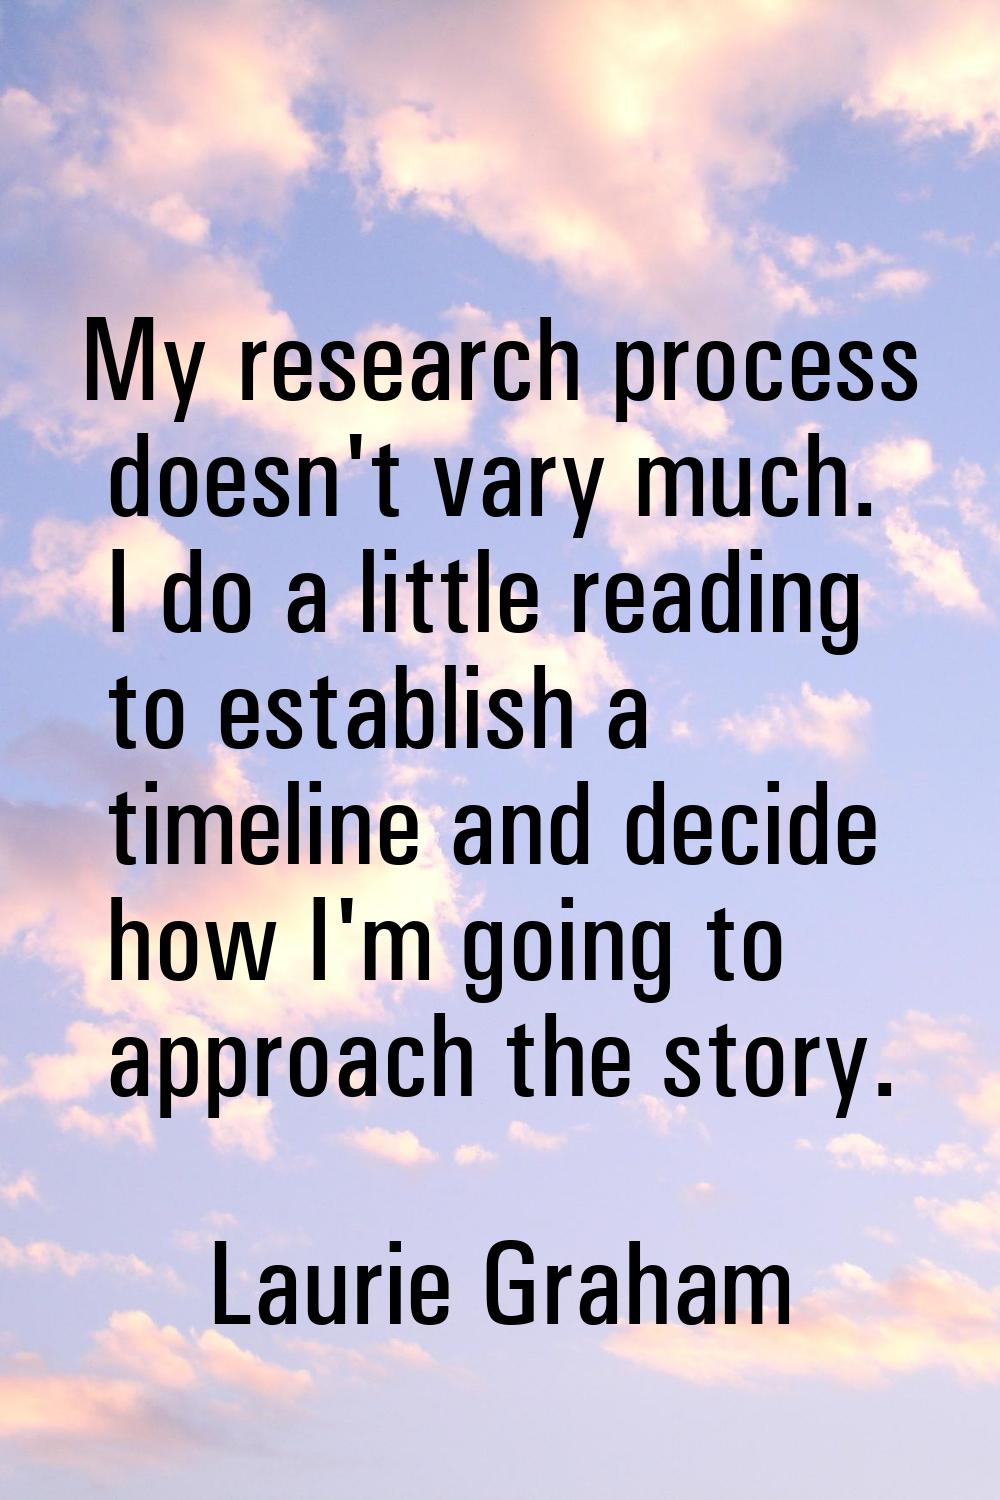 My research process doesn't vary much. I do a little reading to establish a timeline and decide how